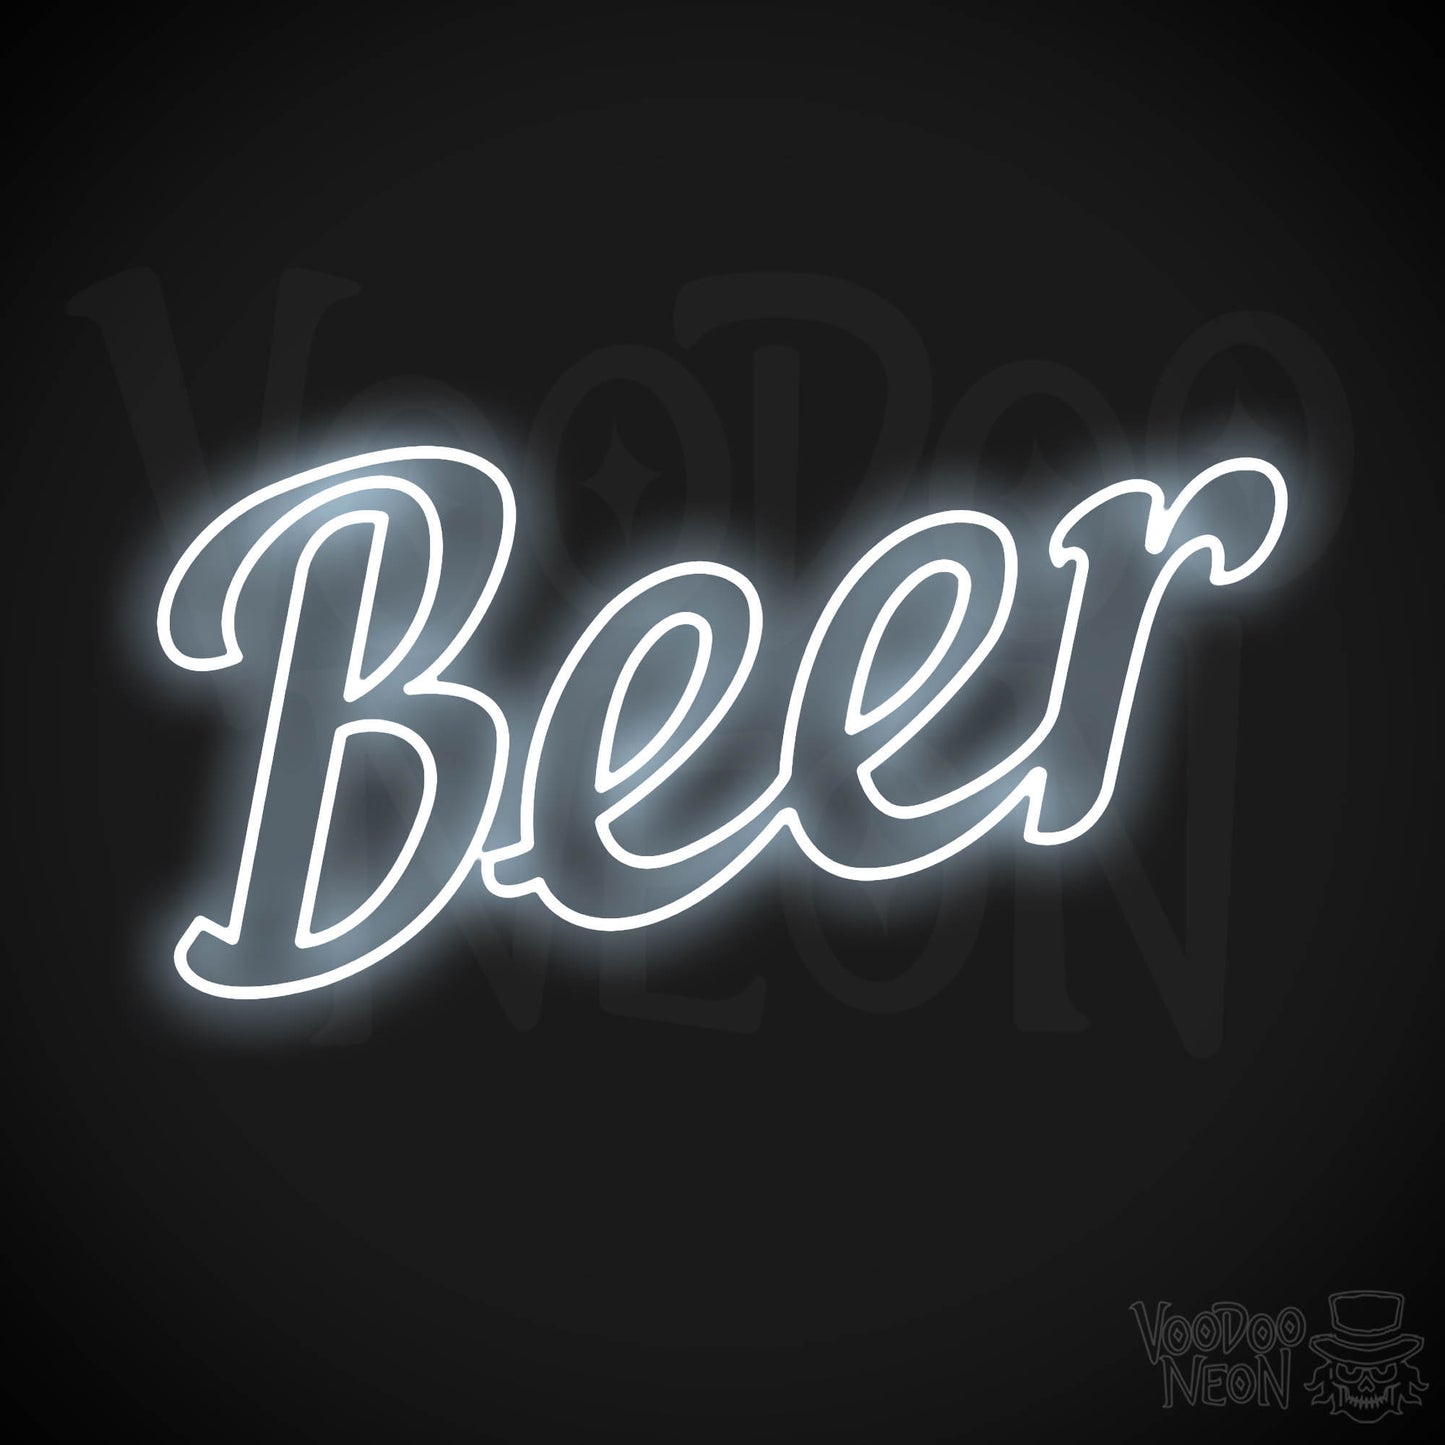 Beer LED Neon - Cool White